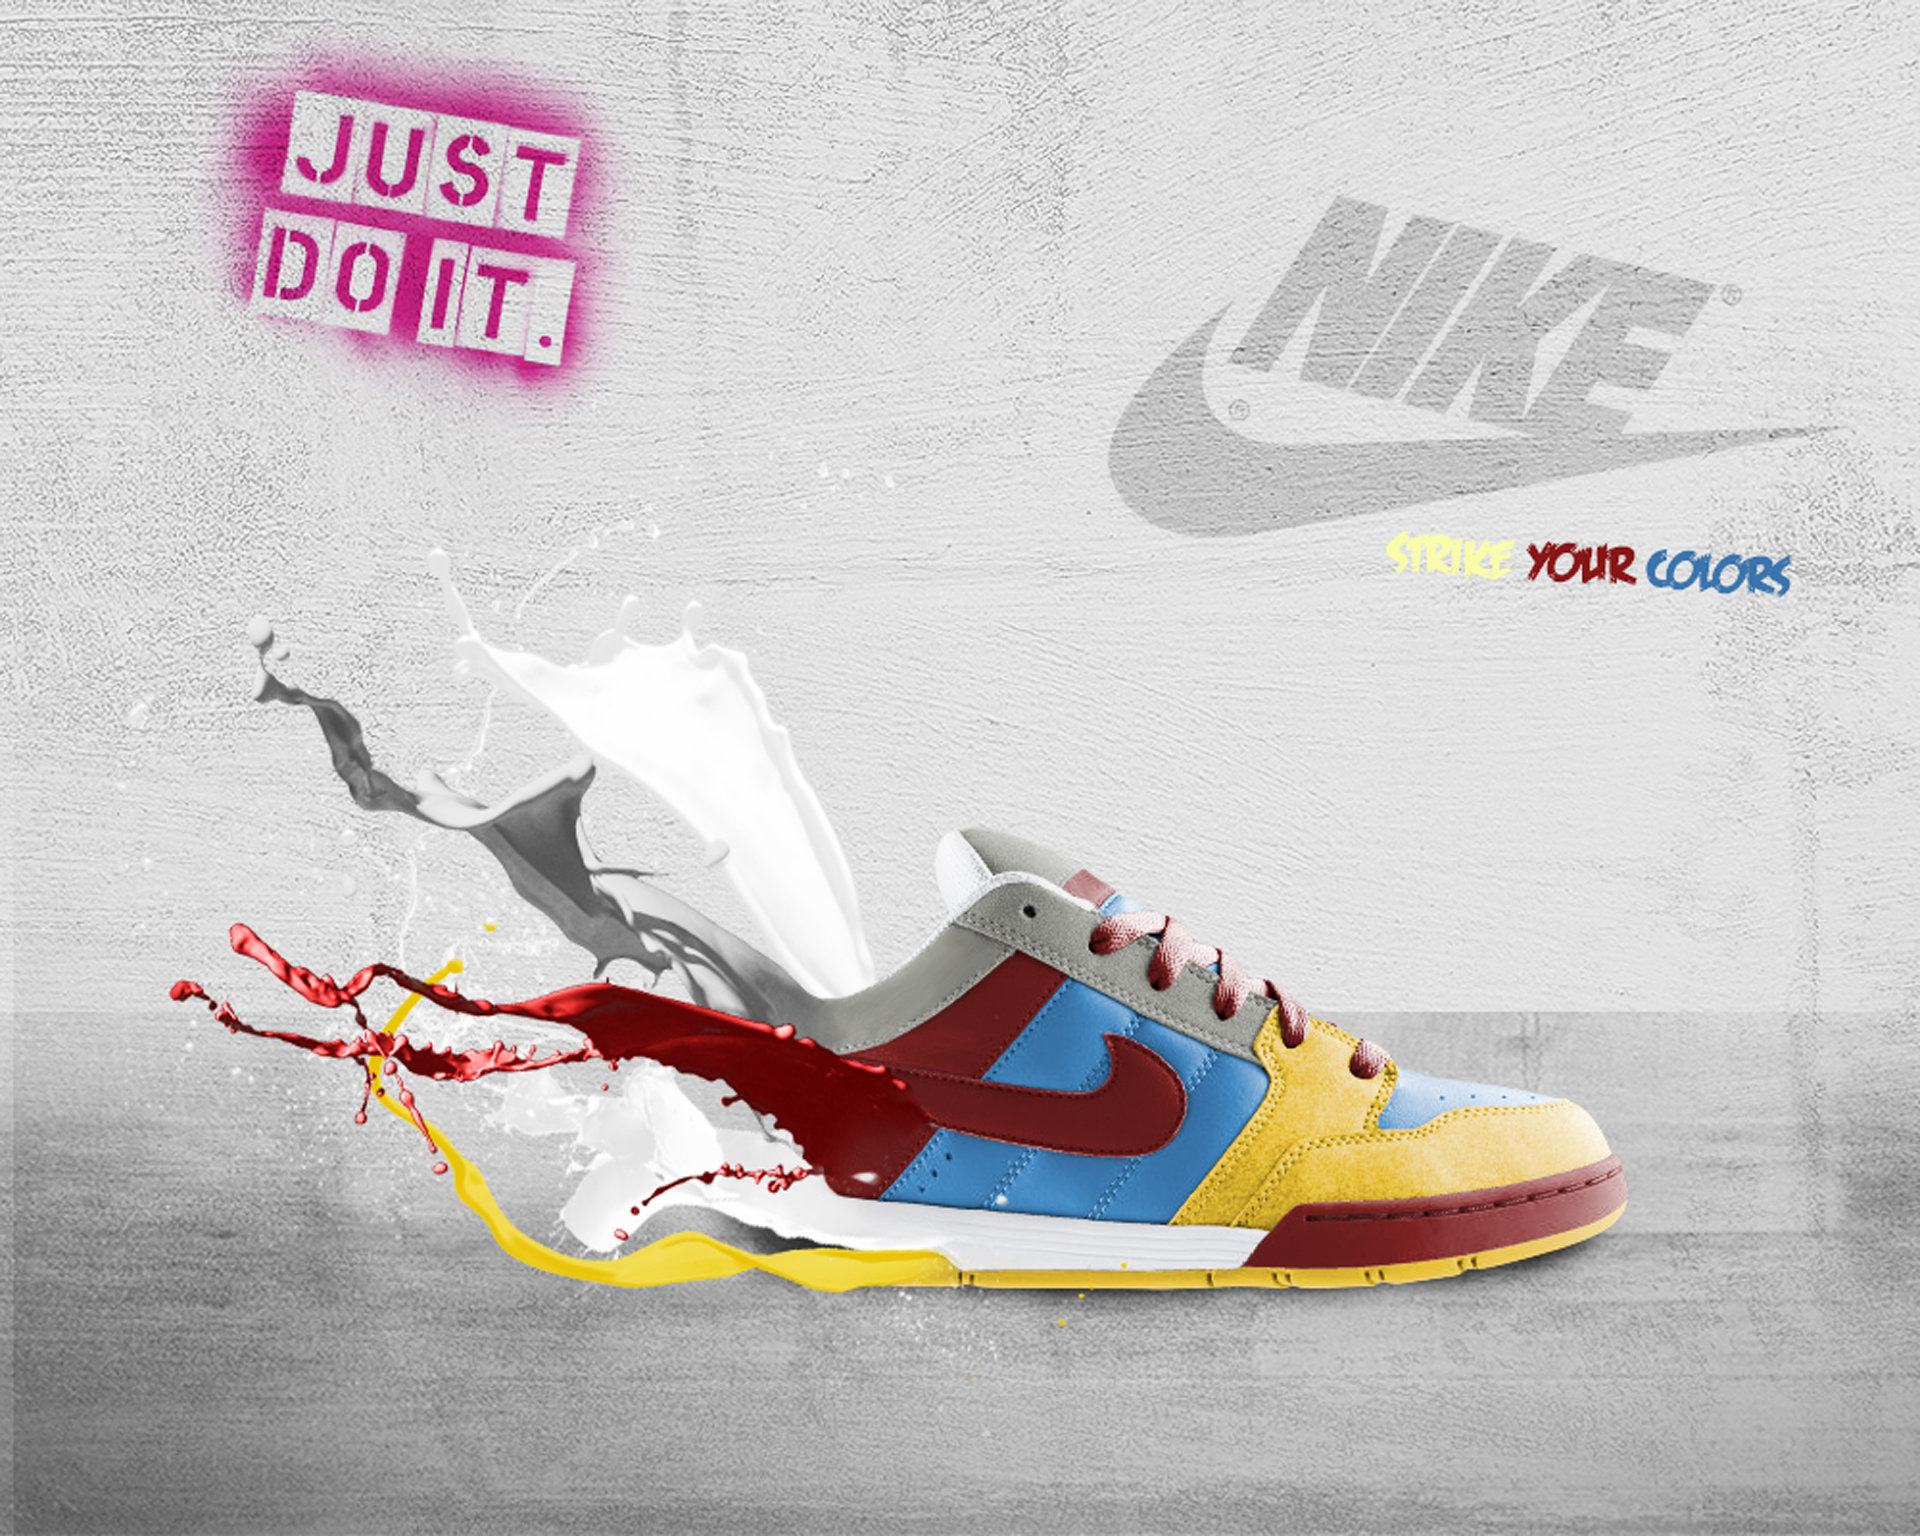 ArtStation - NIKE ad done in pohotoshop